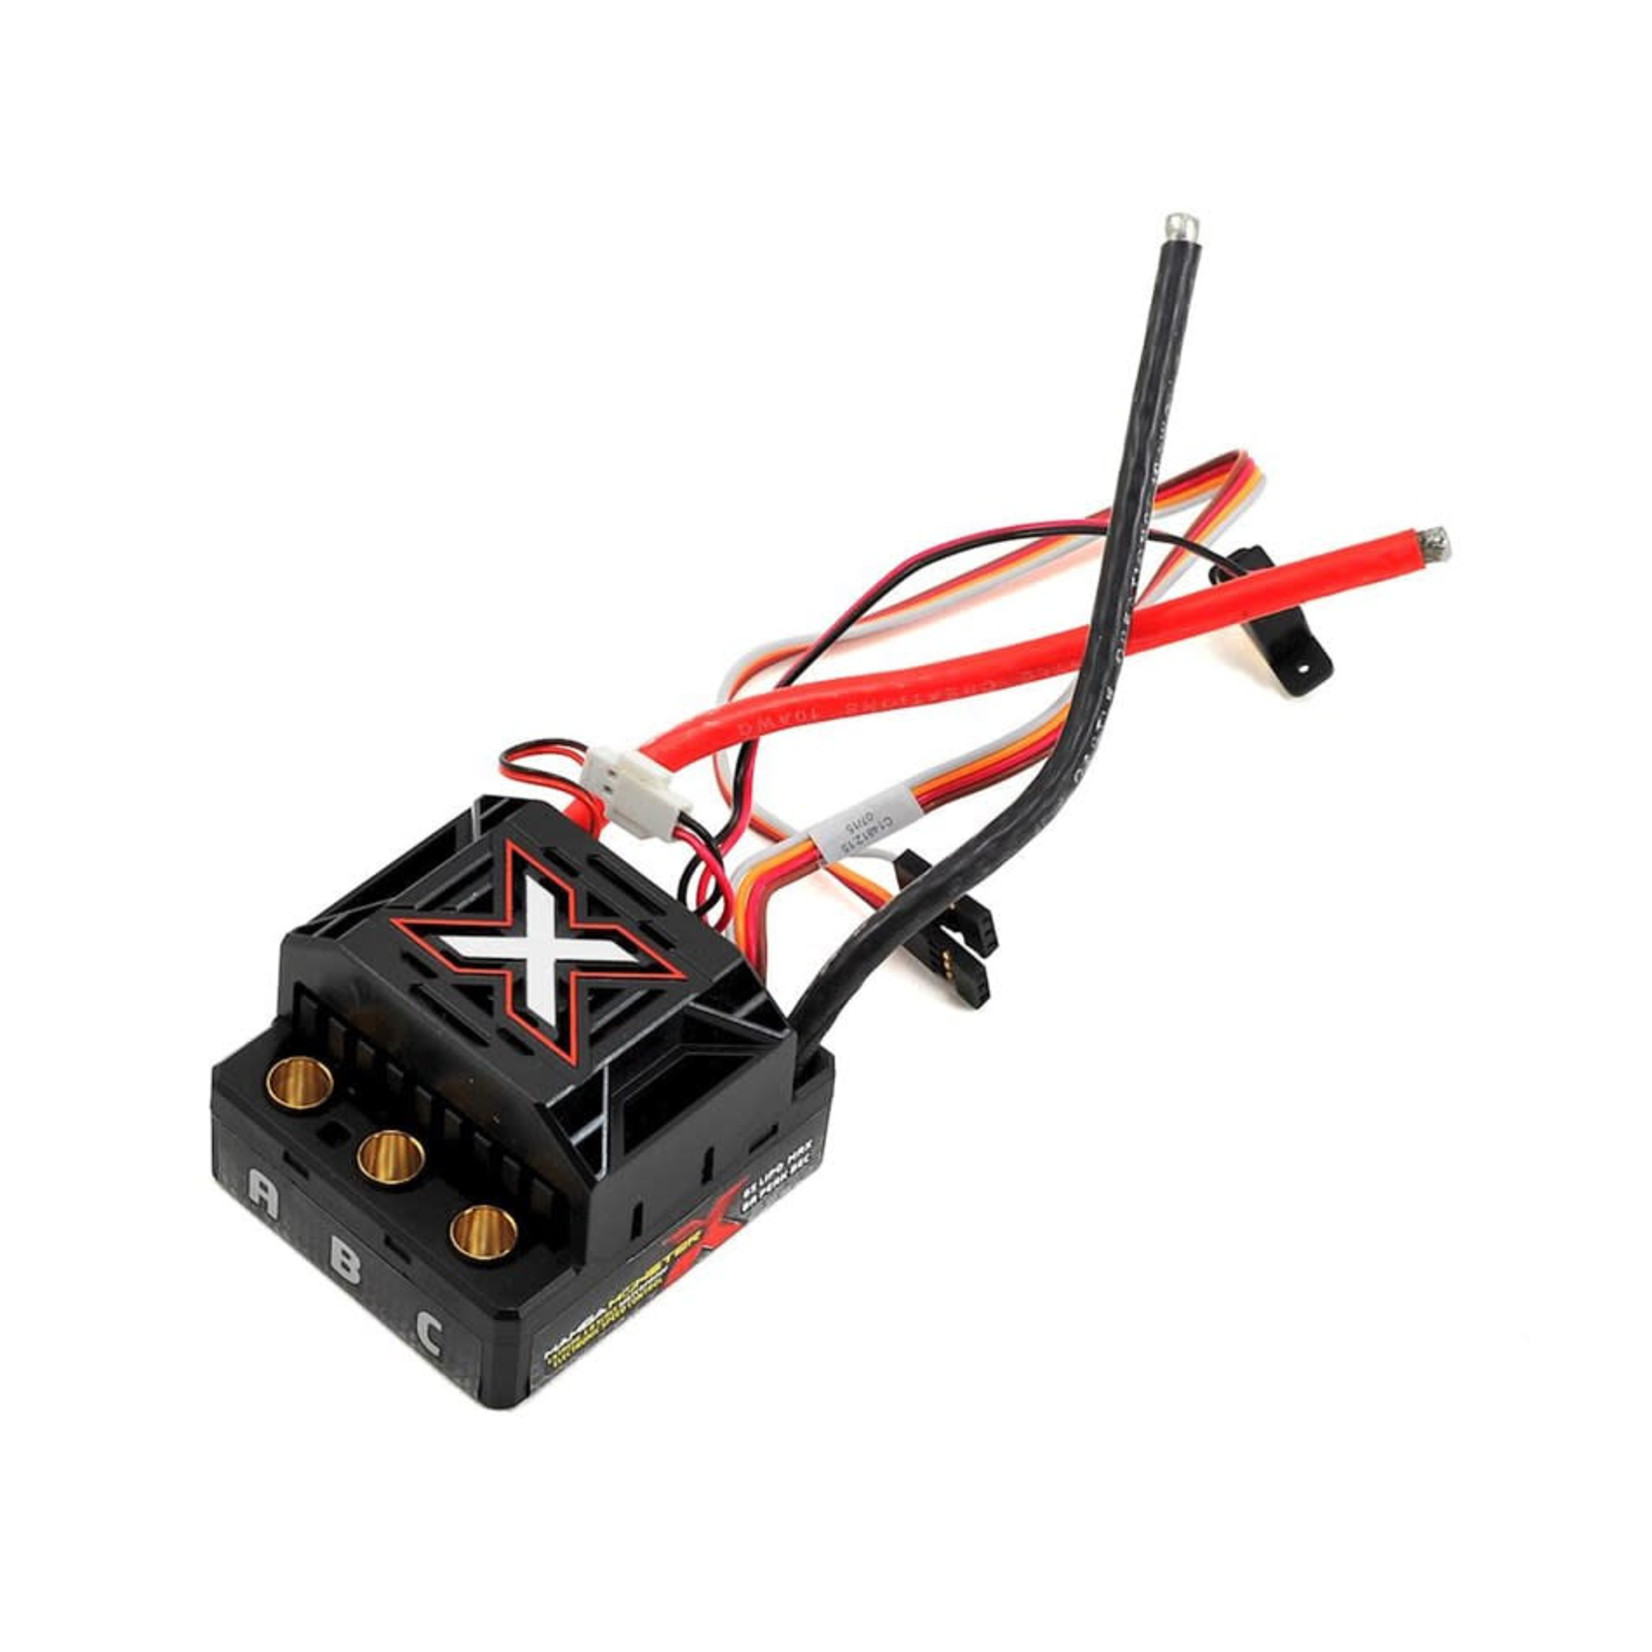 Castle Creations Castle Creations Mamba Monster X Waterproof 1/8 Scale Brushless ESC #010-0145-00